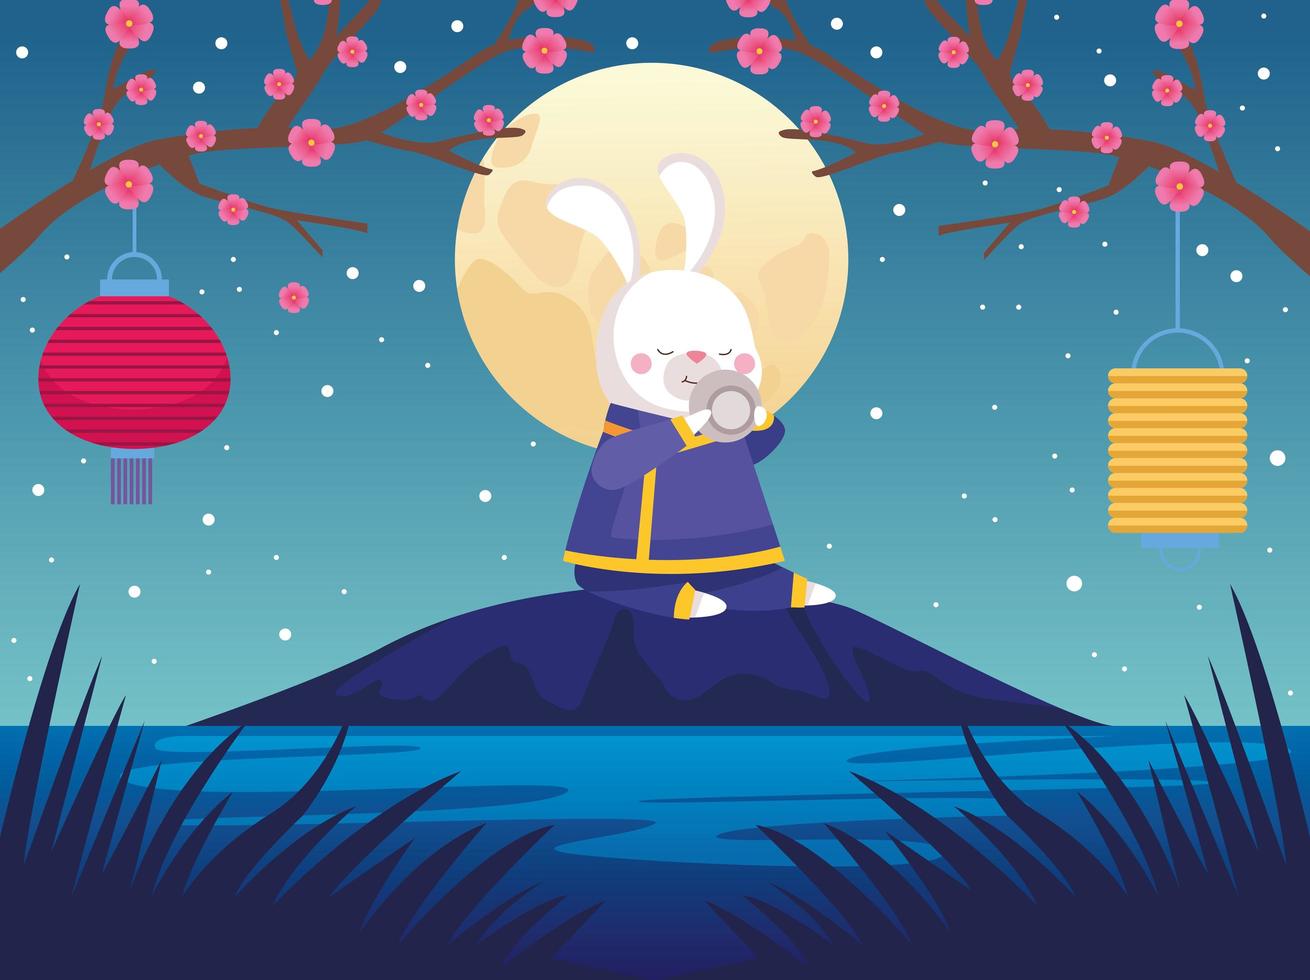 mid autumn celebration card with rabbit and fullmoon scene vector